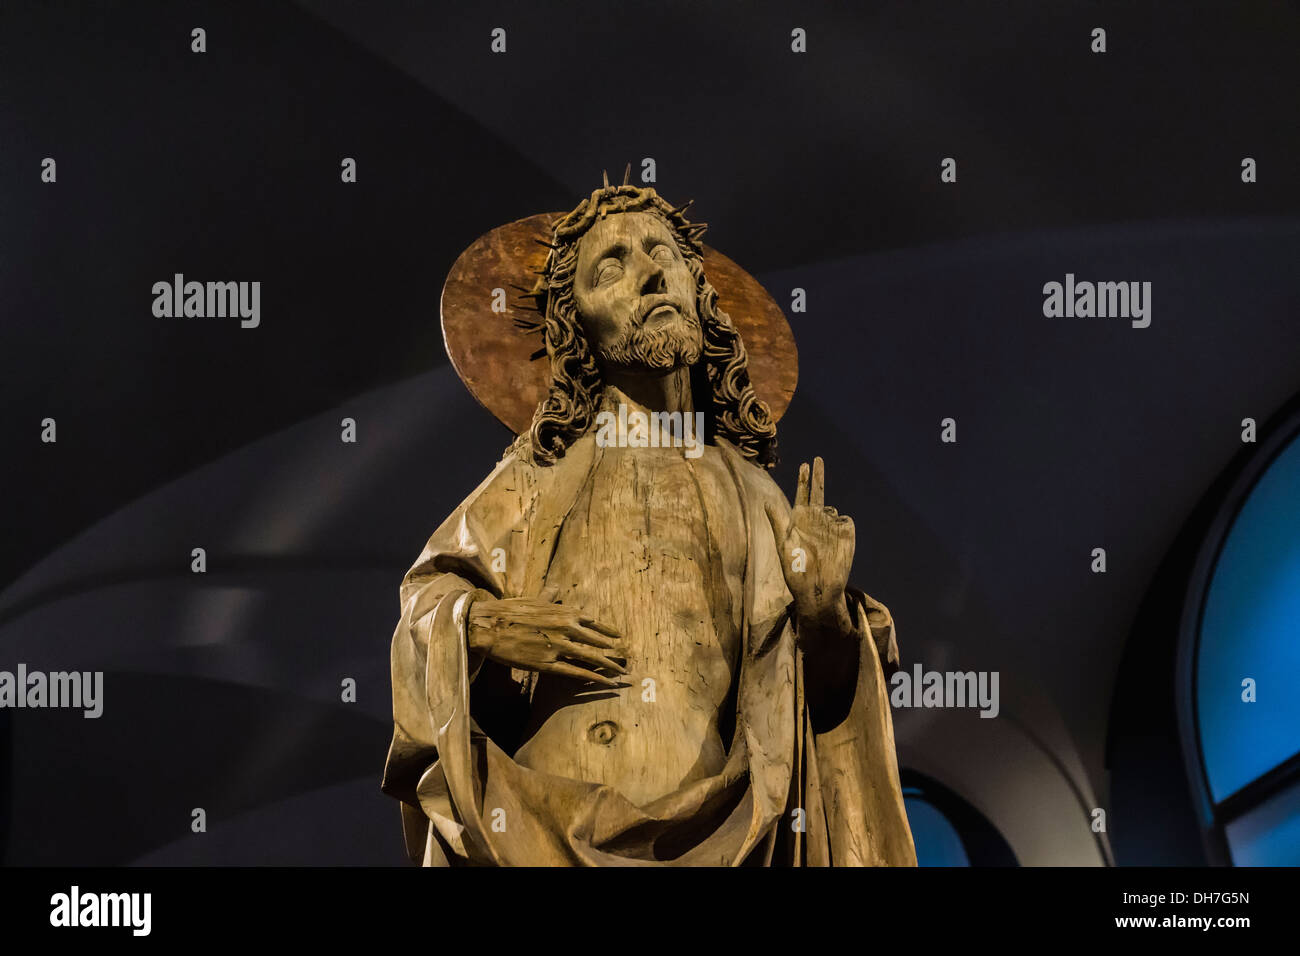 Christ as the Man of Sorrows (Double Sided Sculpture), Artist: Erasmus Grasser, 1480/90) at Bode Museum, Berlin Stock Photo